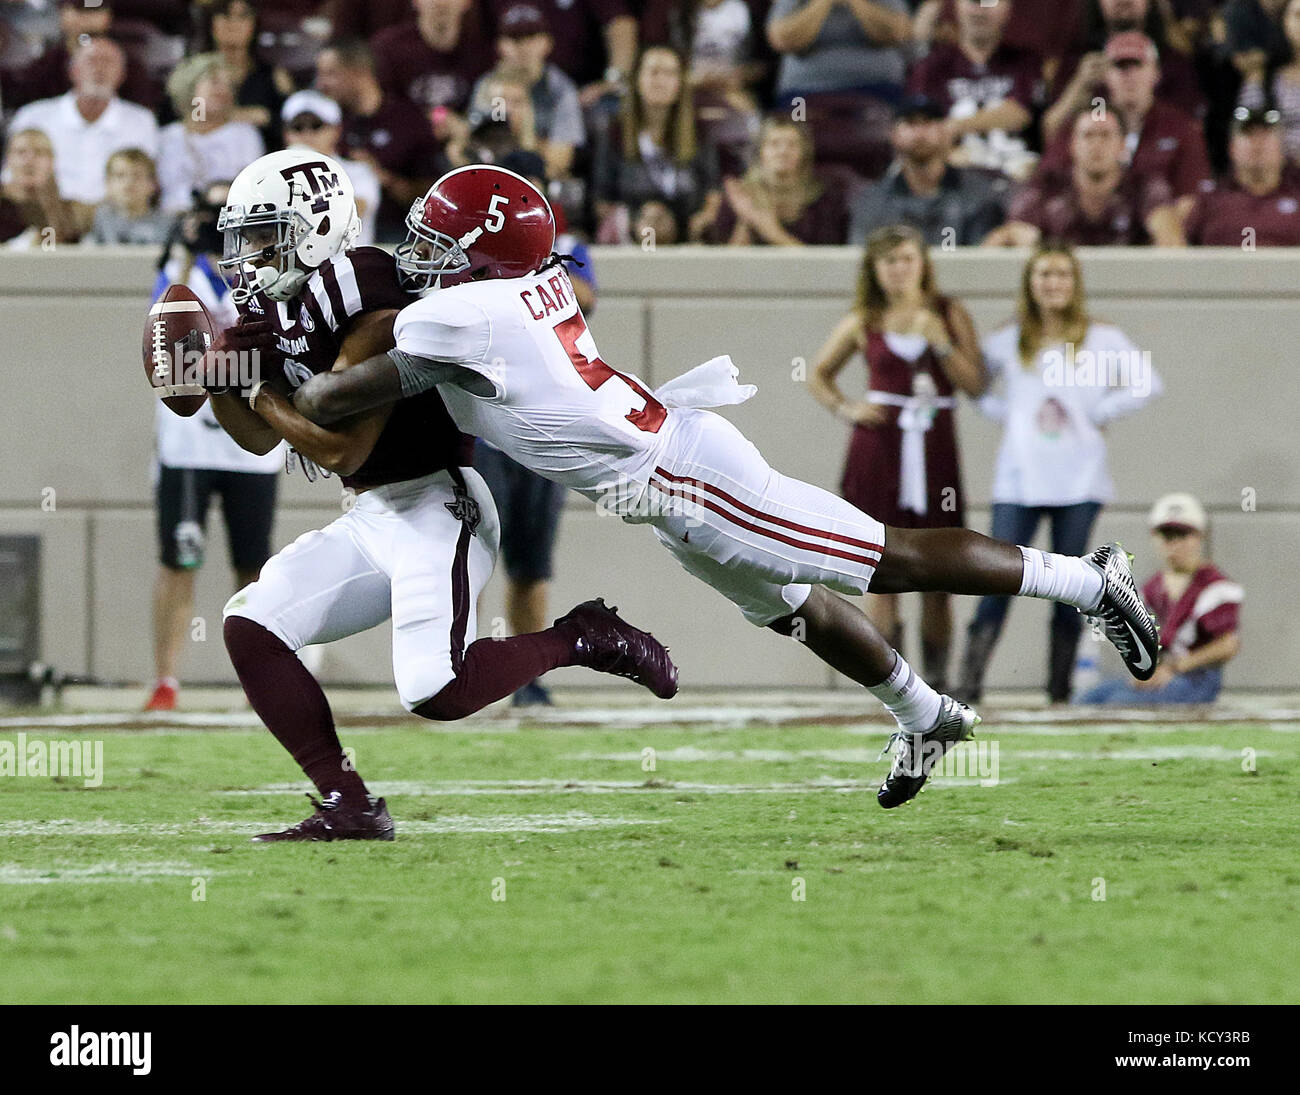 October 6, 2017: Alabama Crimson Tide defensive back Shyheim Carter (5) disrupts a pass to Texas A&M Aggies wide receiver Christian Kirk (3) in the third quarter during the NCAA football game between the Alabama Crimson Tide and the Texas A&M Aggies at Kyle Field in College Station, TX; John Glaser/CSM. Stock Photo